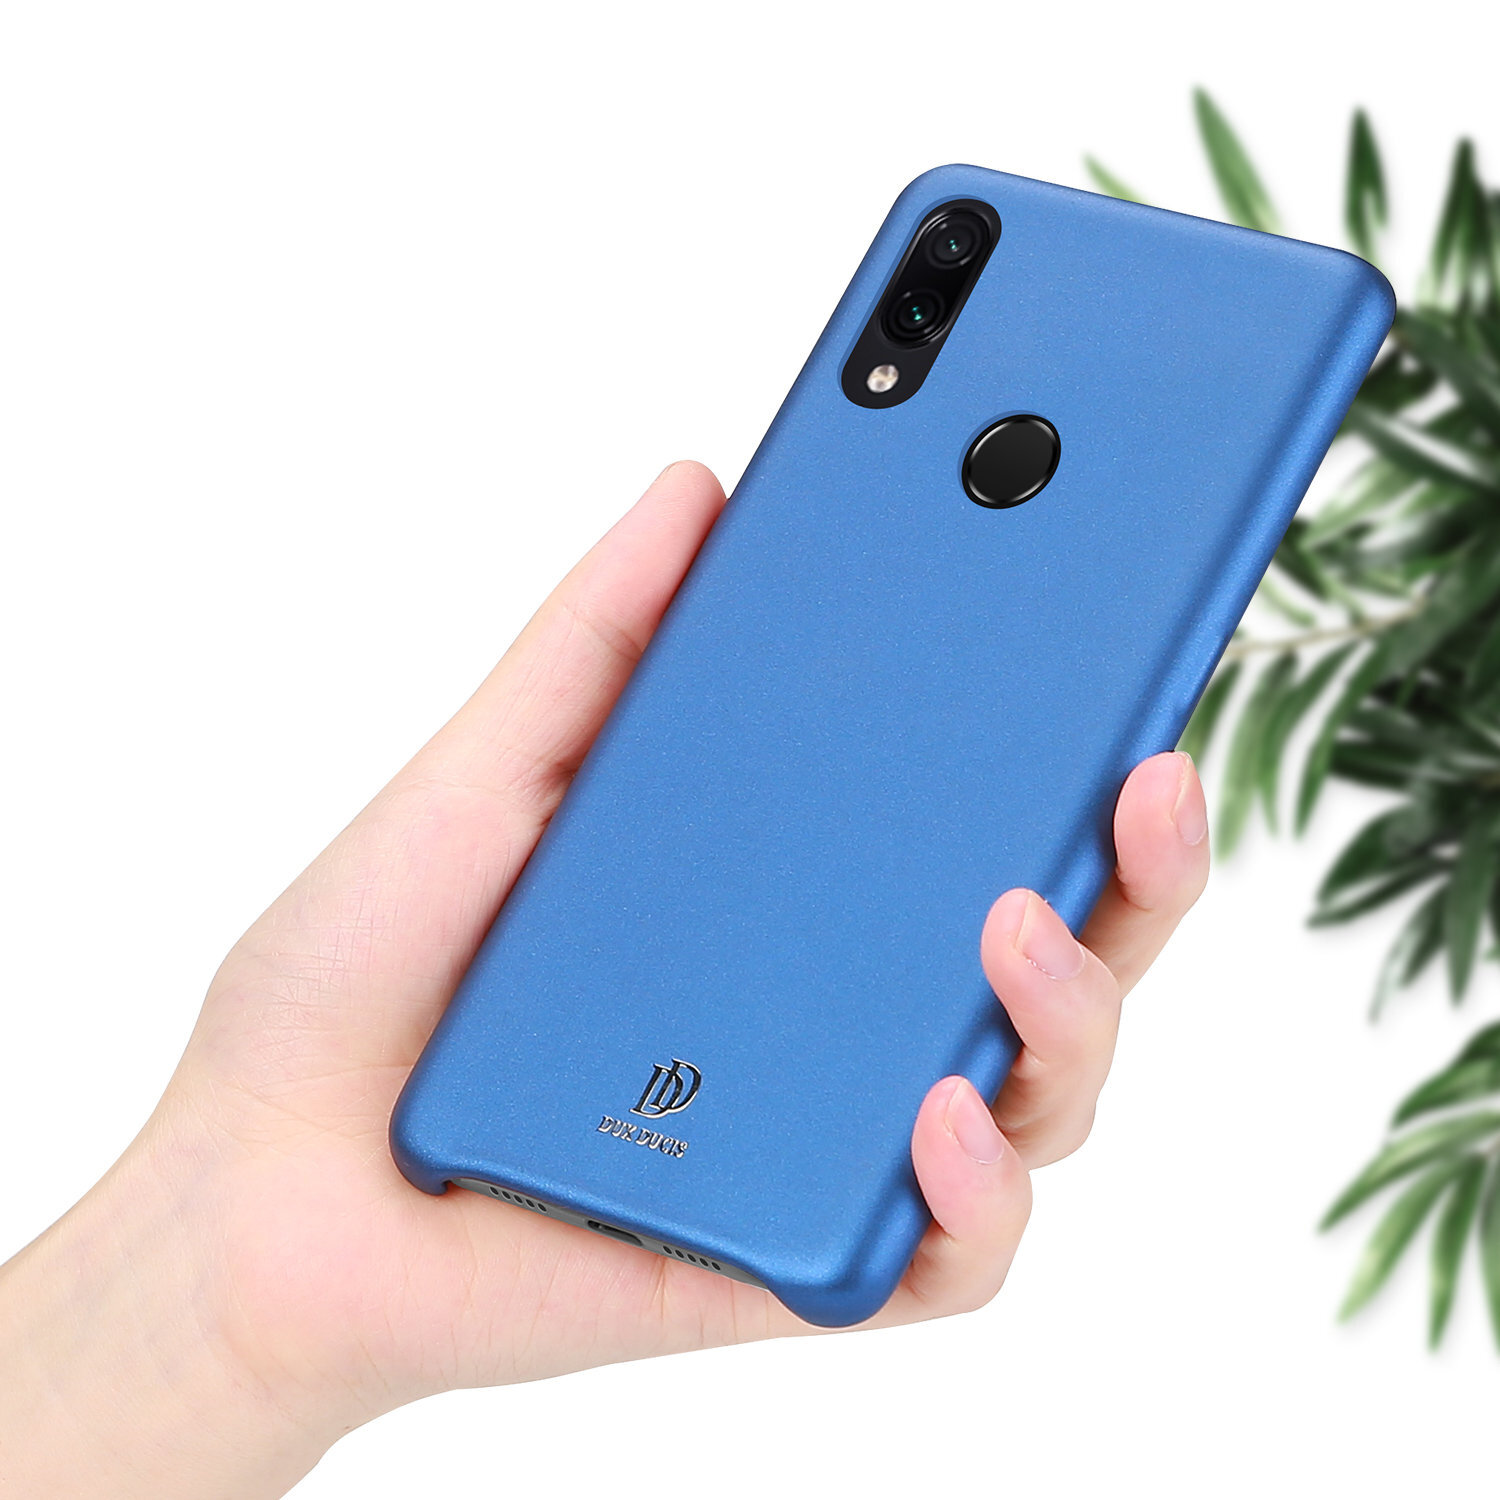 DUX DUCIS Smooth Touch Shockproof PU Leather&Silicone Soft Protective Case For Xiaomi Redmi 7 / Redmi Y3 Non-original